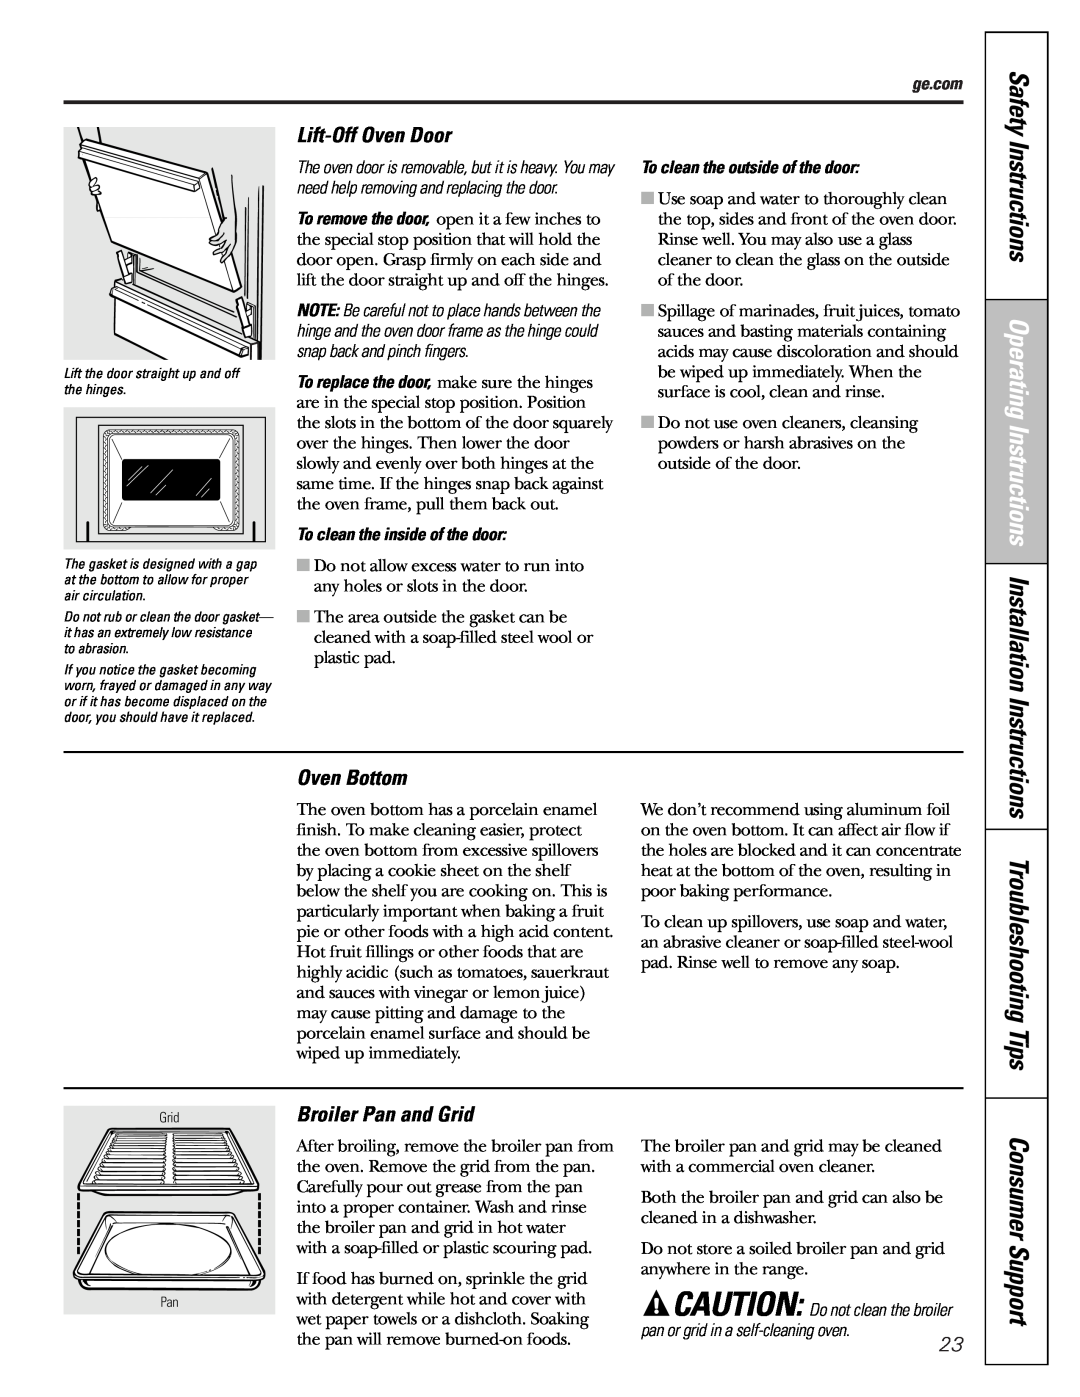 GE JGBS80 Instructions Operating Instructions, Consumer Support, Troubleshooting Tips, Lift-OffOven Door, Oven Bottom 